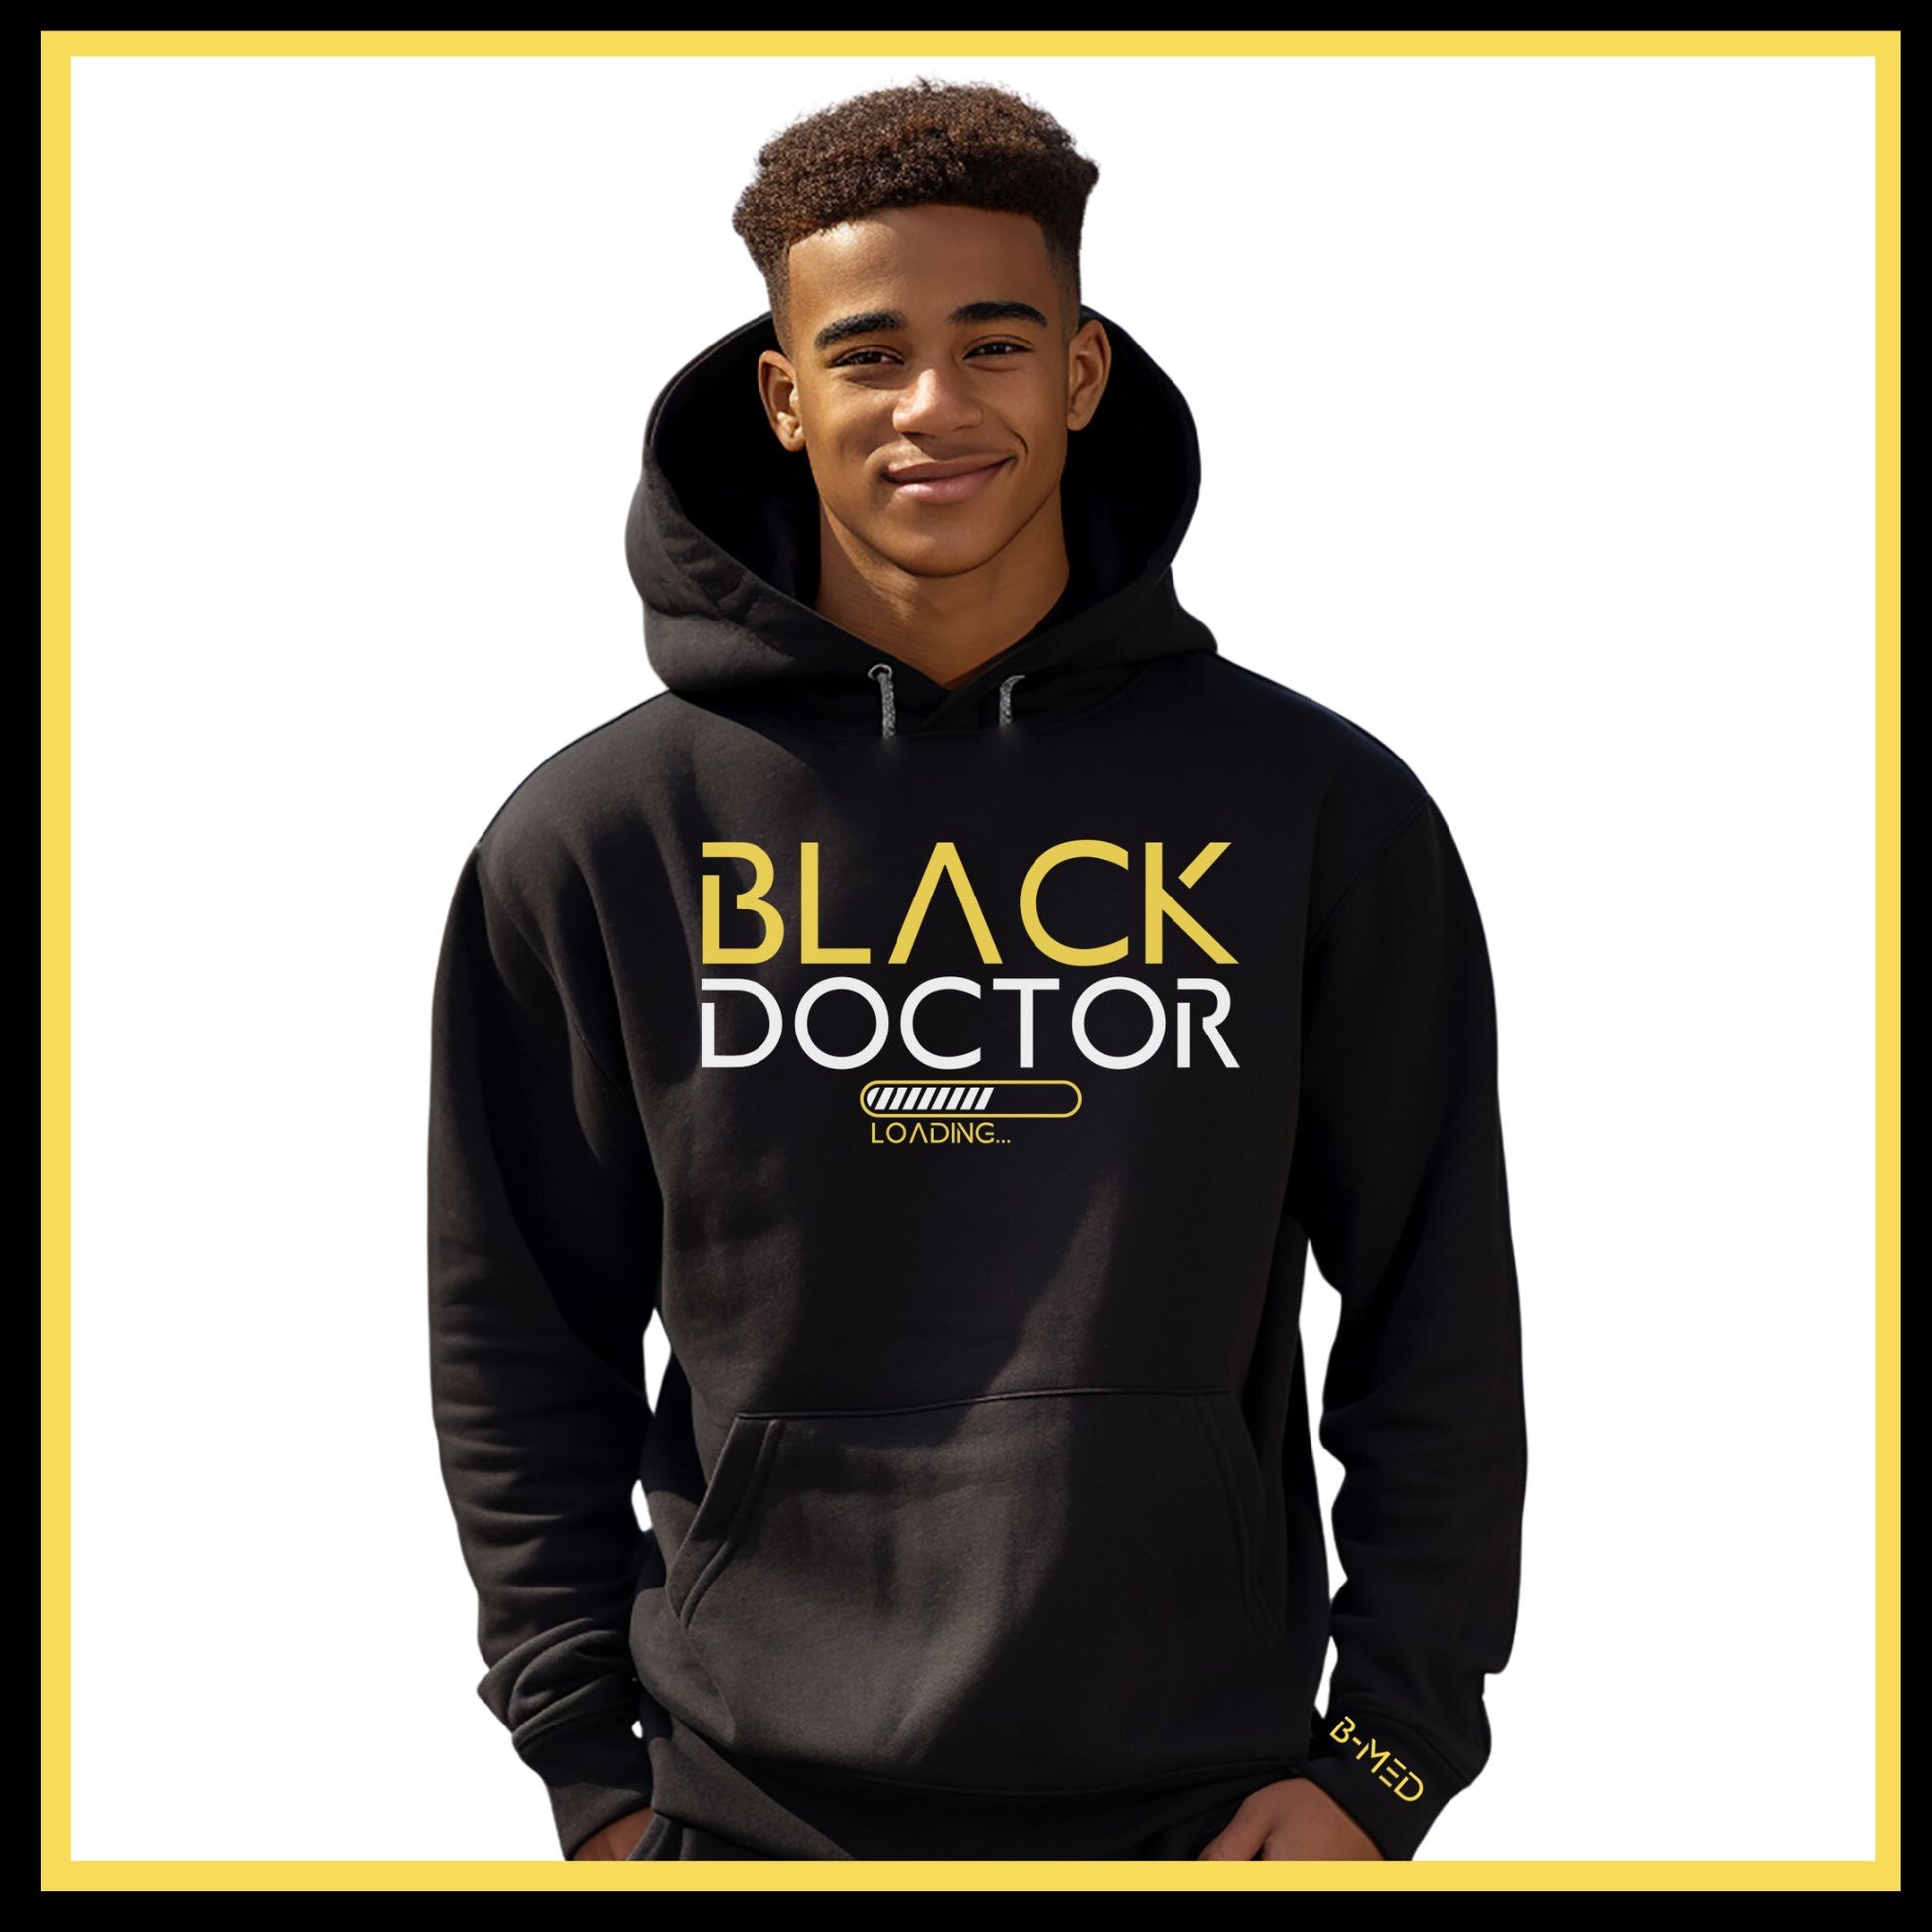 Black Hoodie featuring Black Doctor Loading design, a statement piece for aspiring doctors dedicated to increasing diversity in medicine.